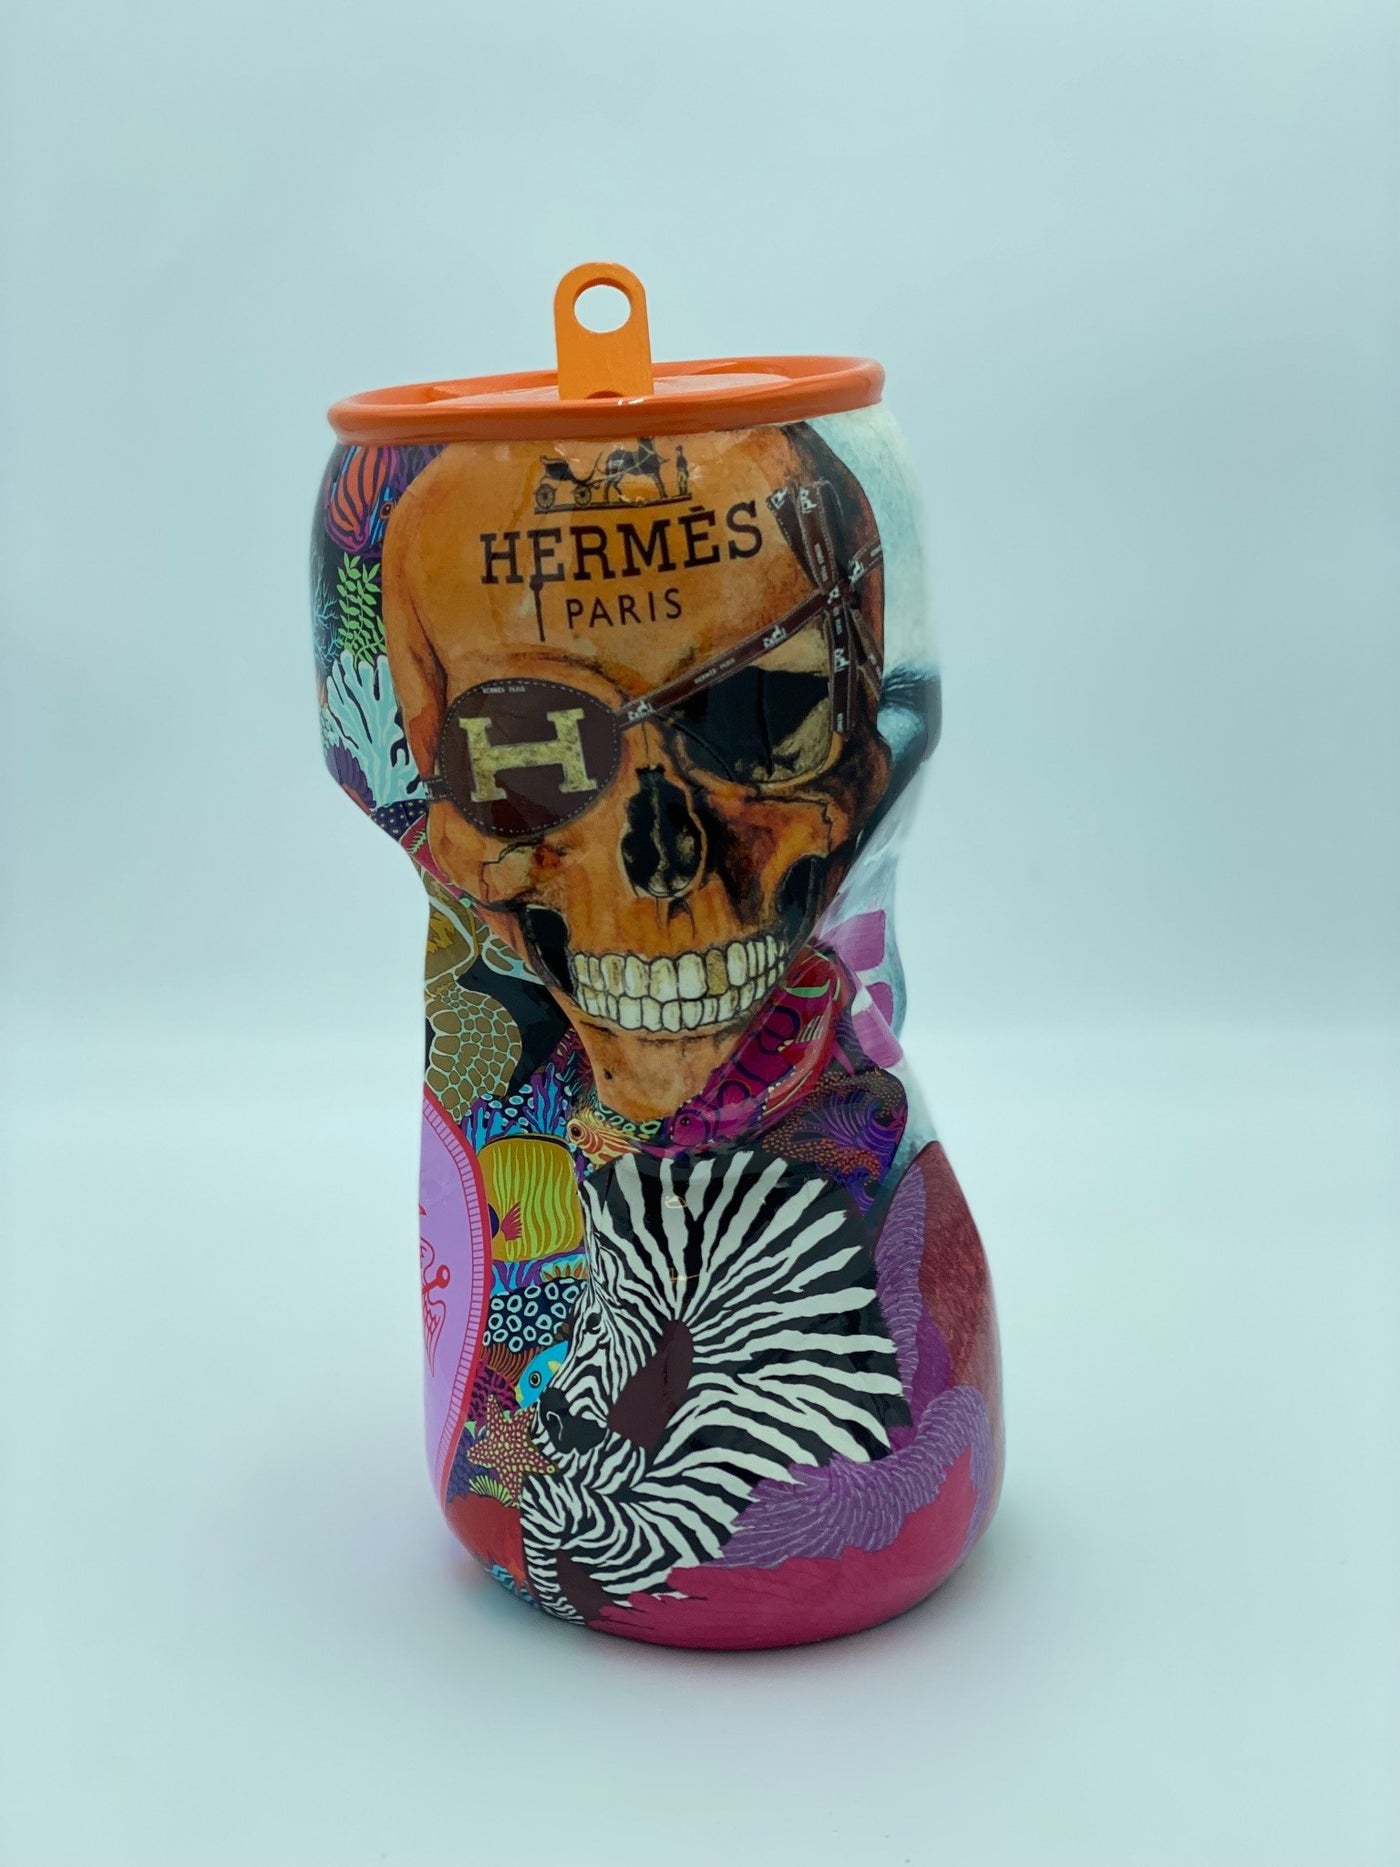 Hermes Cans